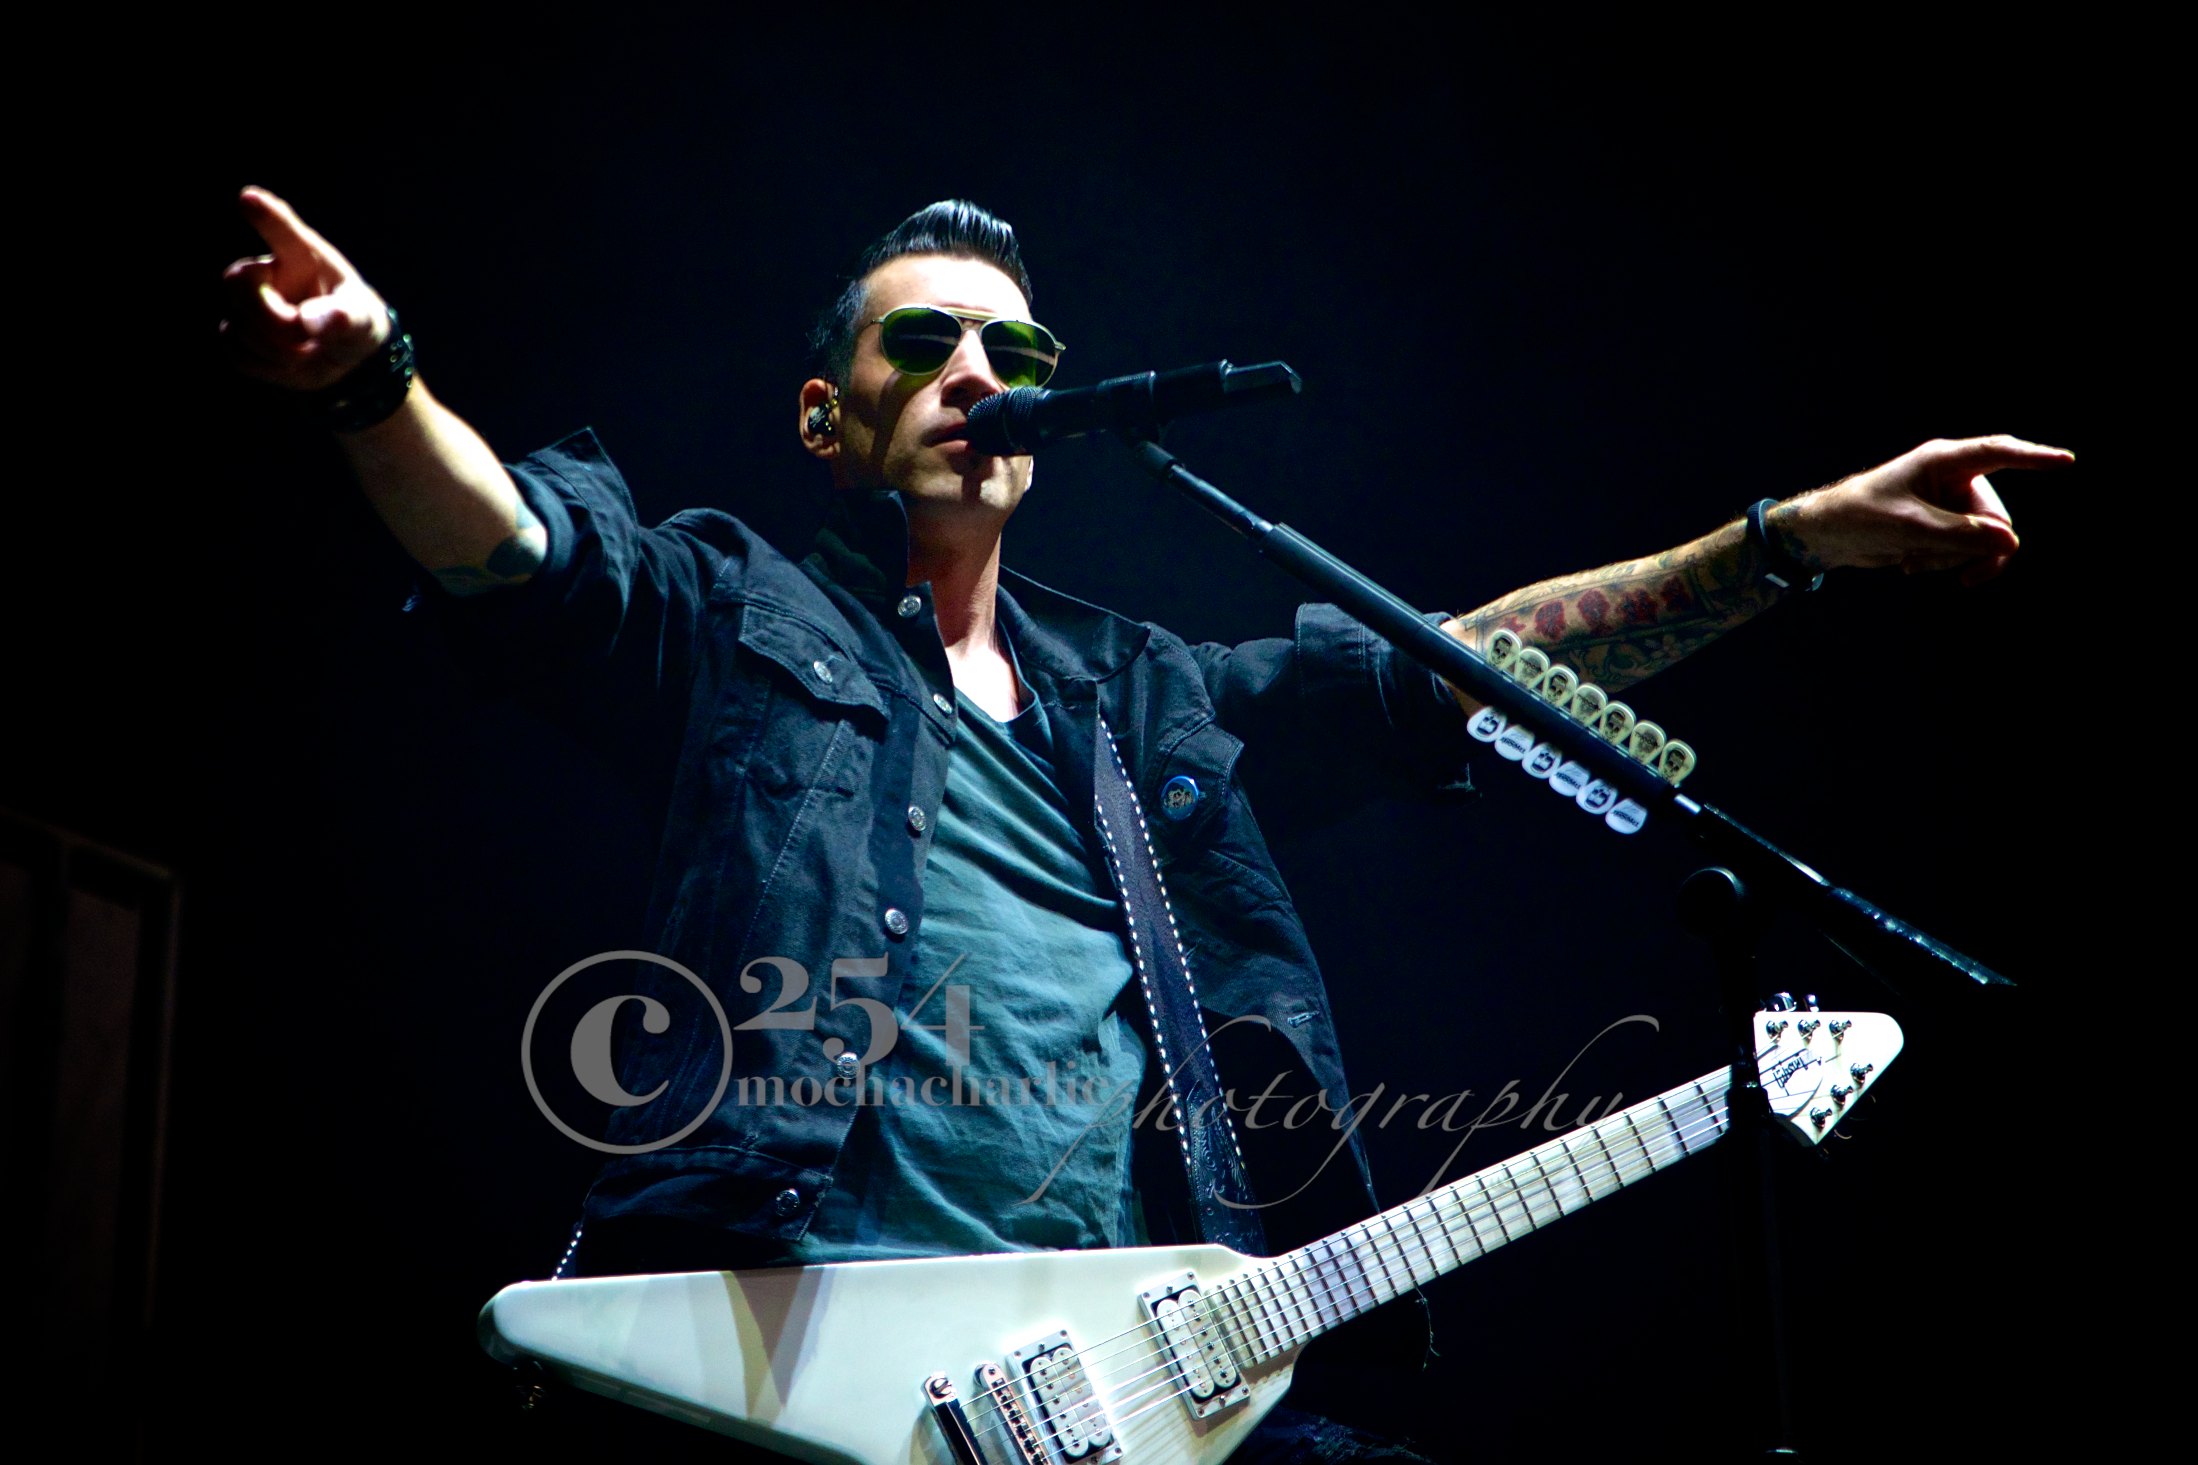 Theory of a Deadman at Uproar (Photo by Mocha Charlie)